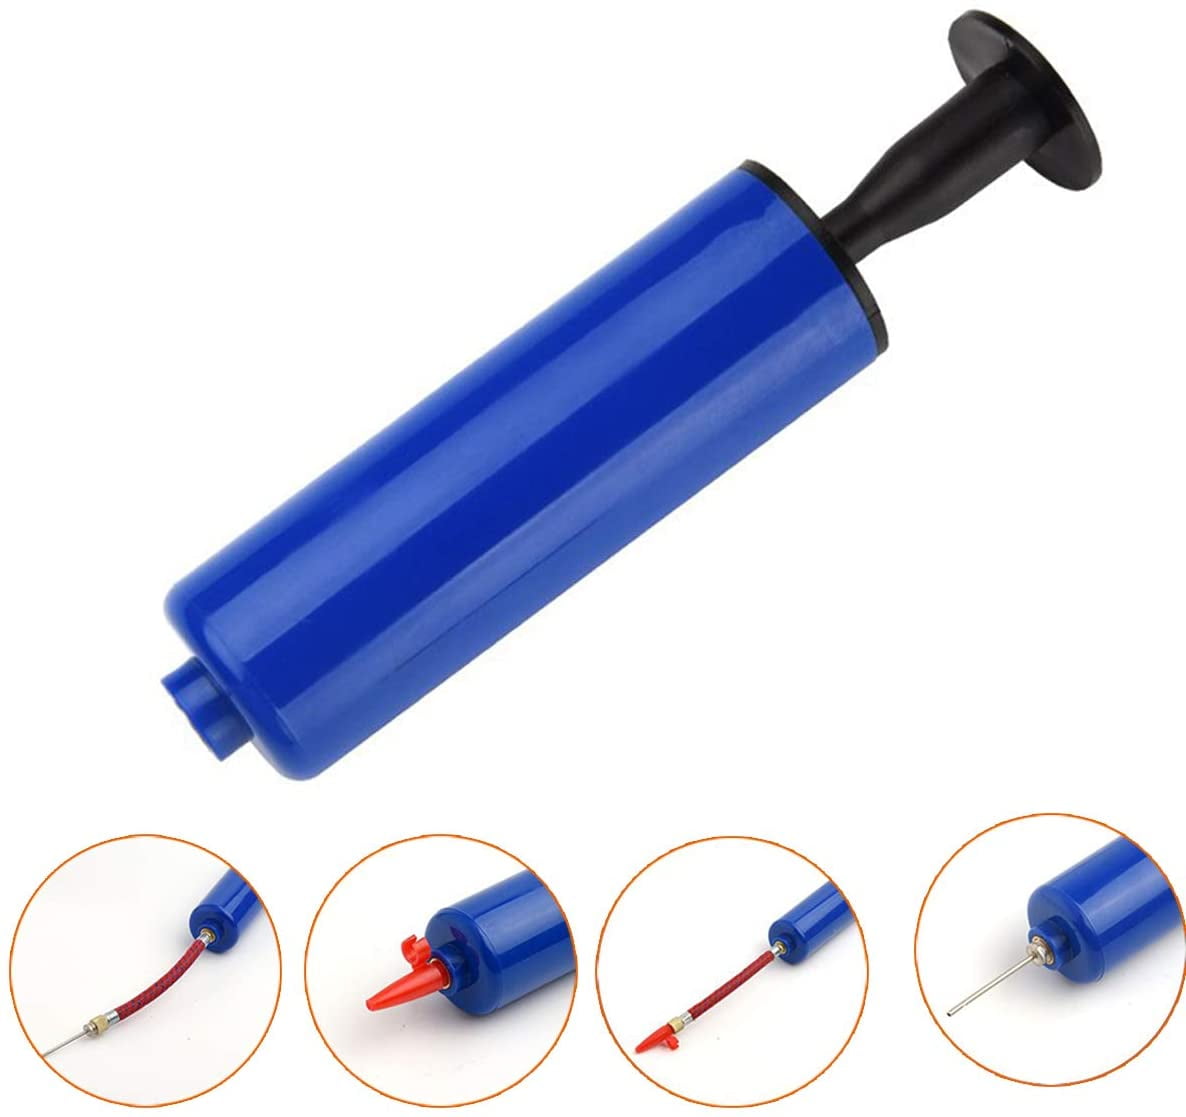 30 pcs Ball Pump Needle with Storage Box Air Inflation Needle for Football  Basketball Soccer Volleyball Ball Sports 